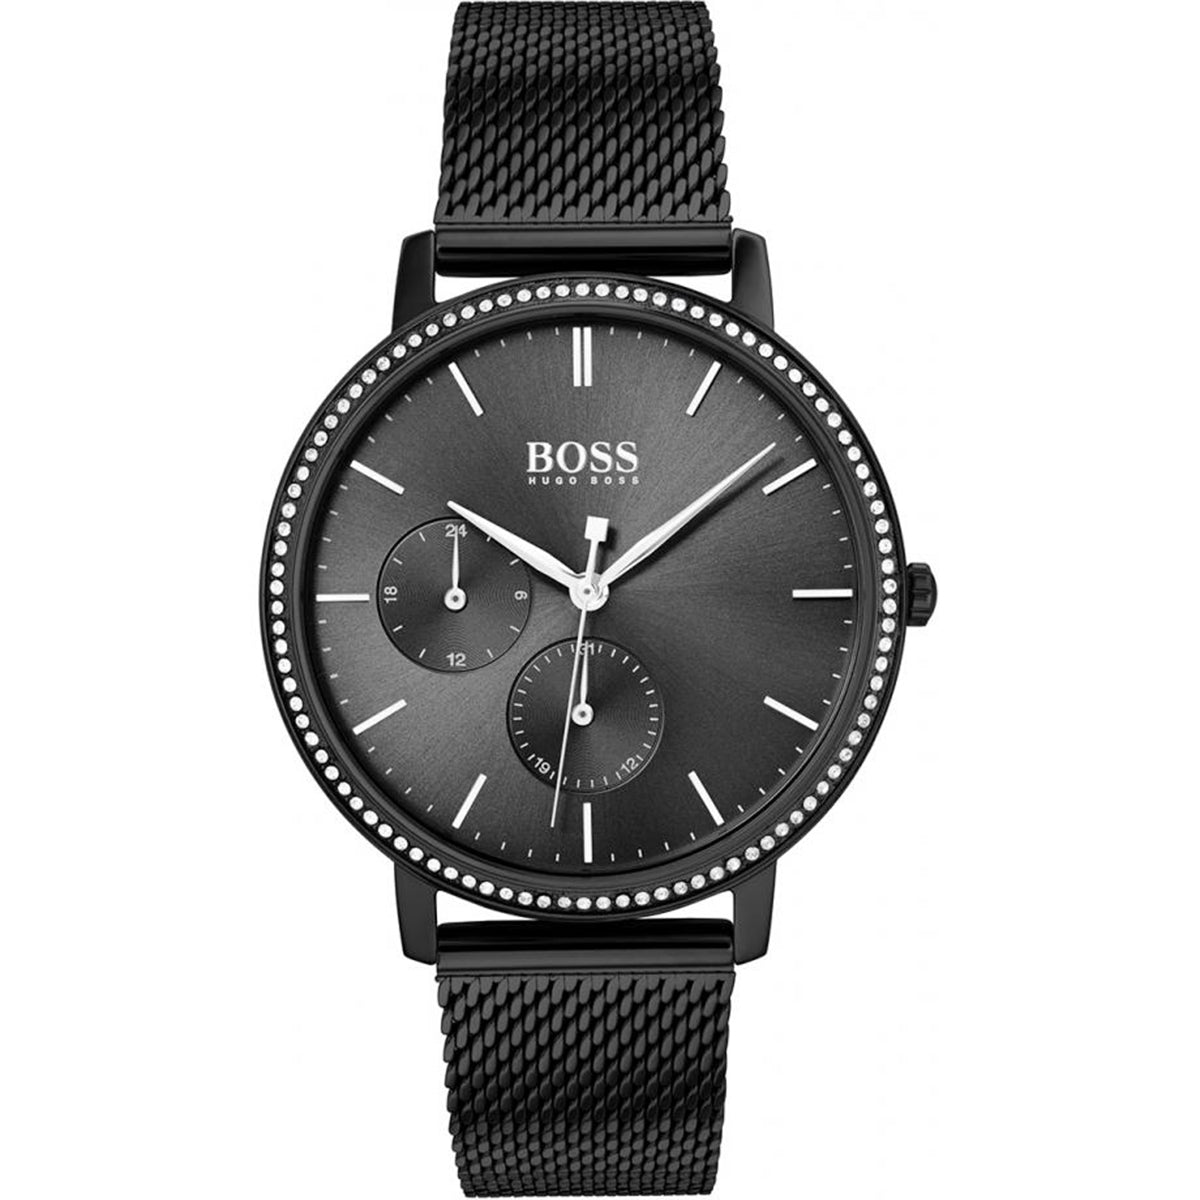 Boss Infinity with three hand movement and sub dials